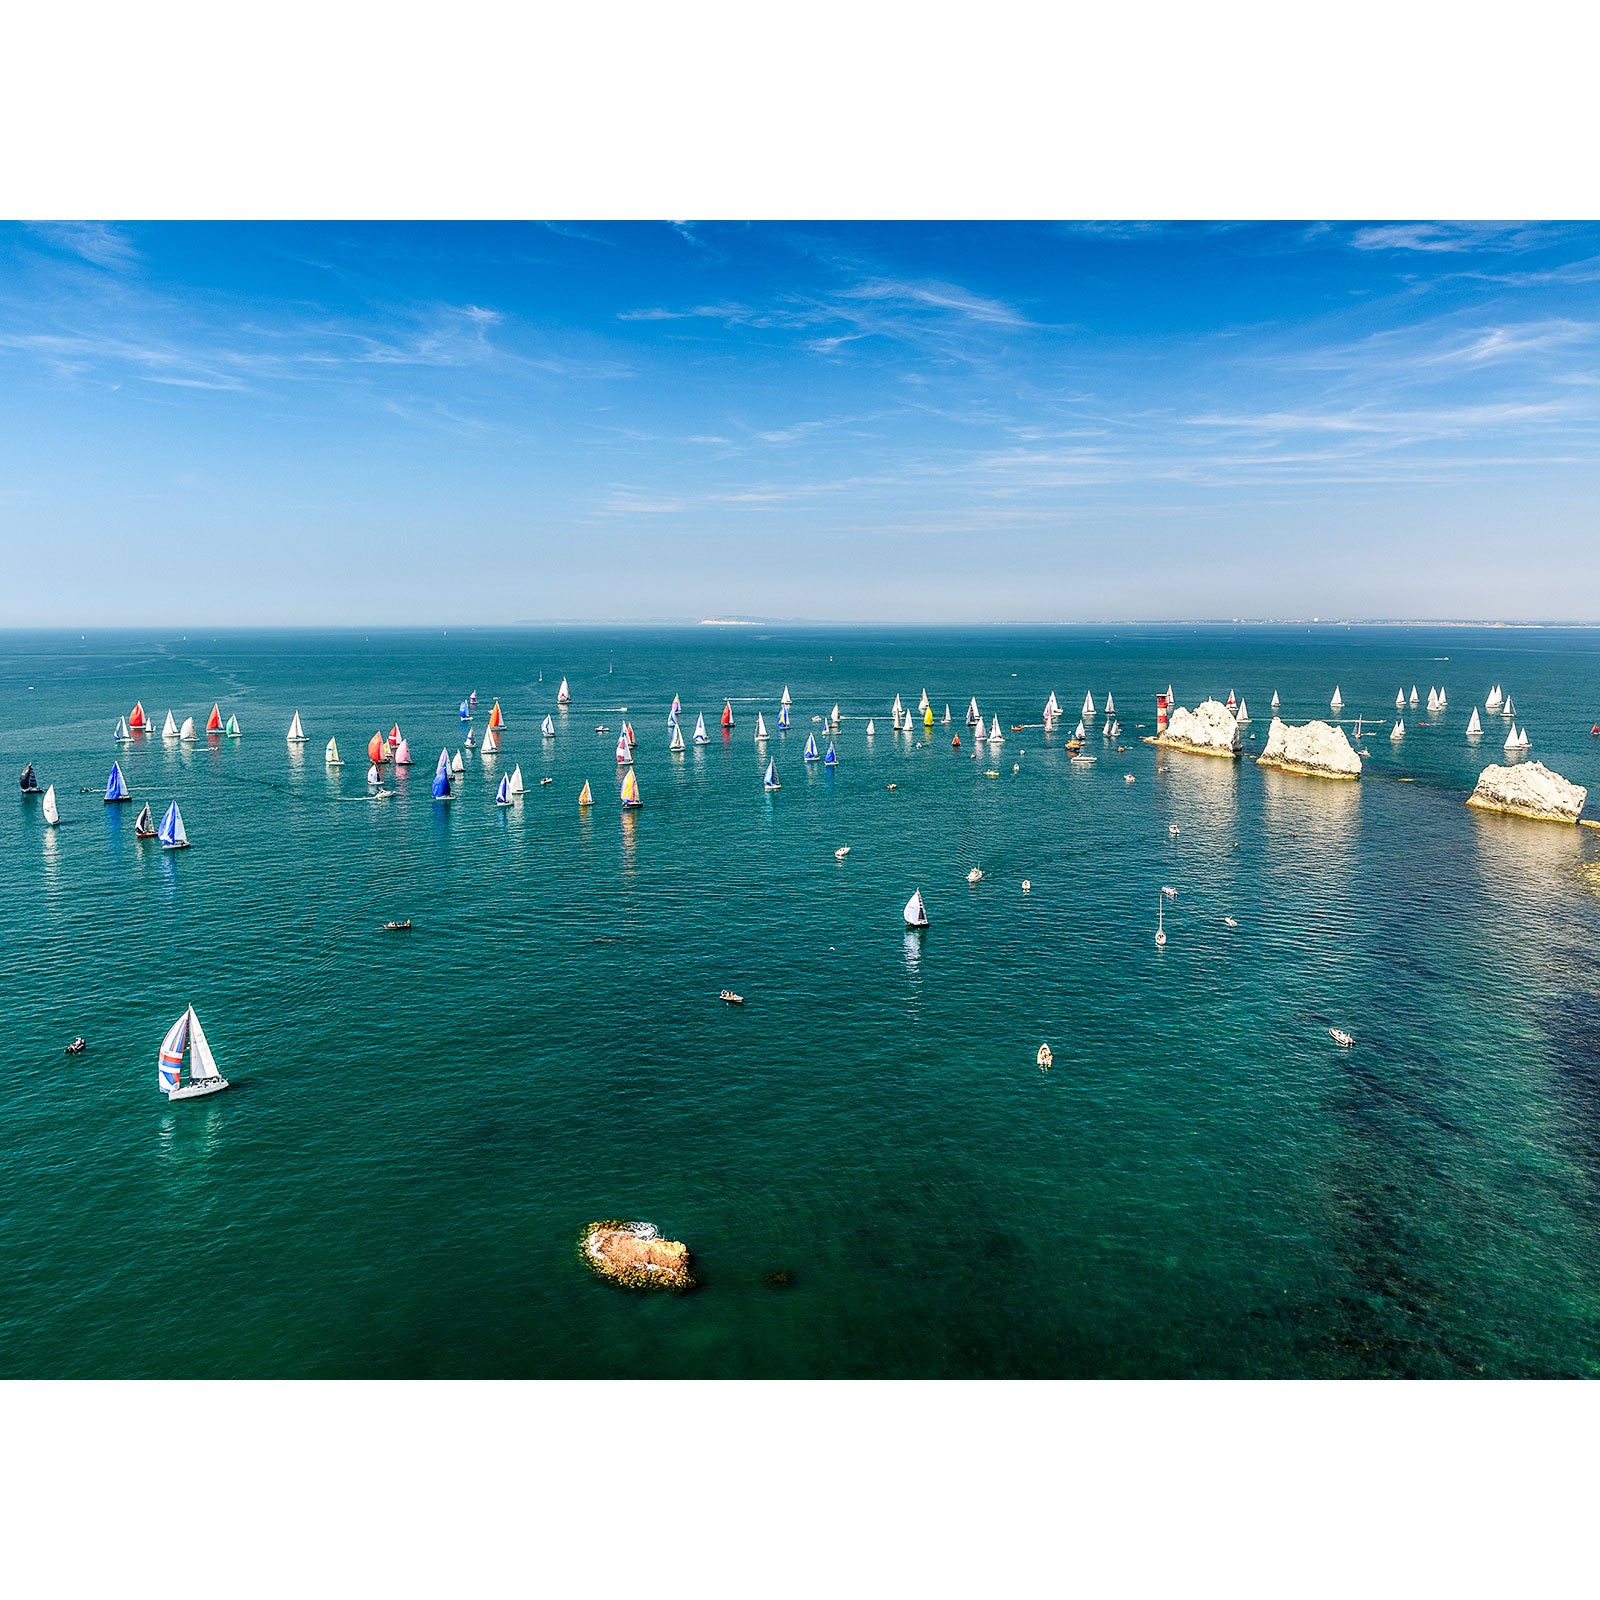 Aerial view of the Round the Island Race near the Isle of Gascoigne with numerous sailboats spread out over open water, with a clear blue sky above and rocky outcrops visible in the sea by Available Light Photography.